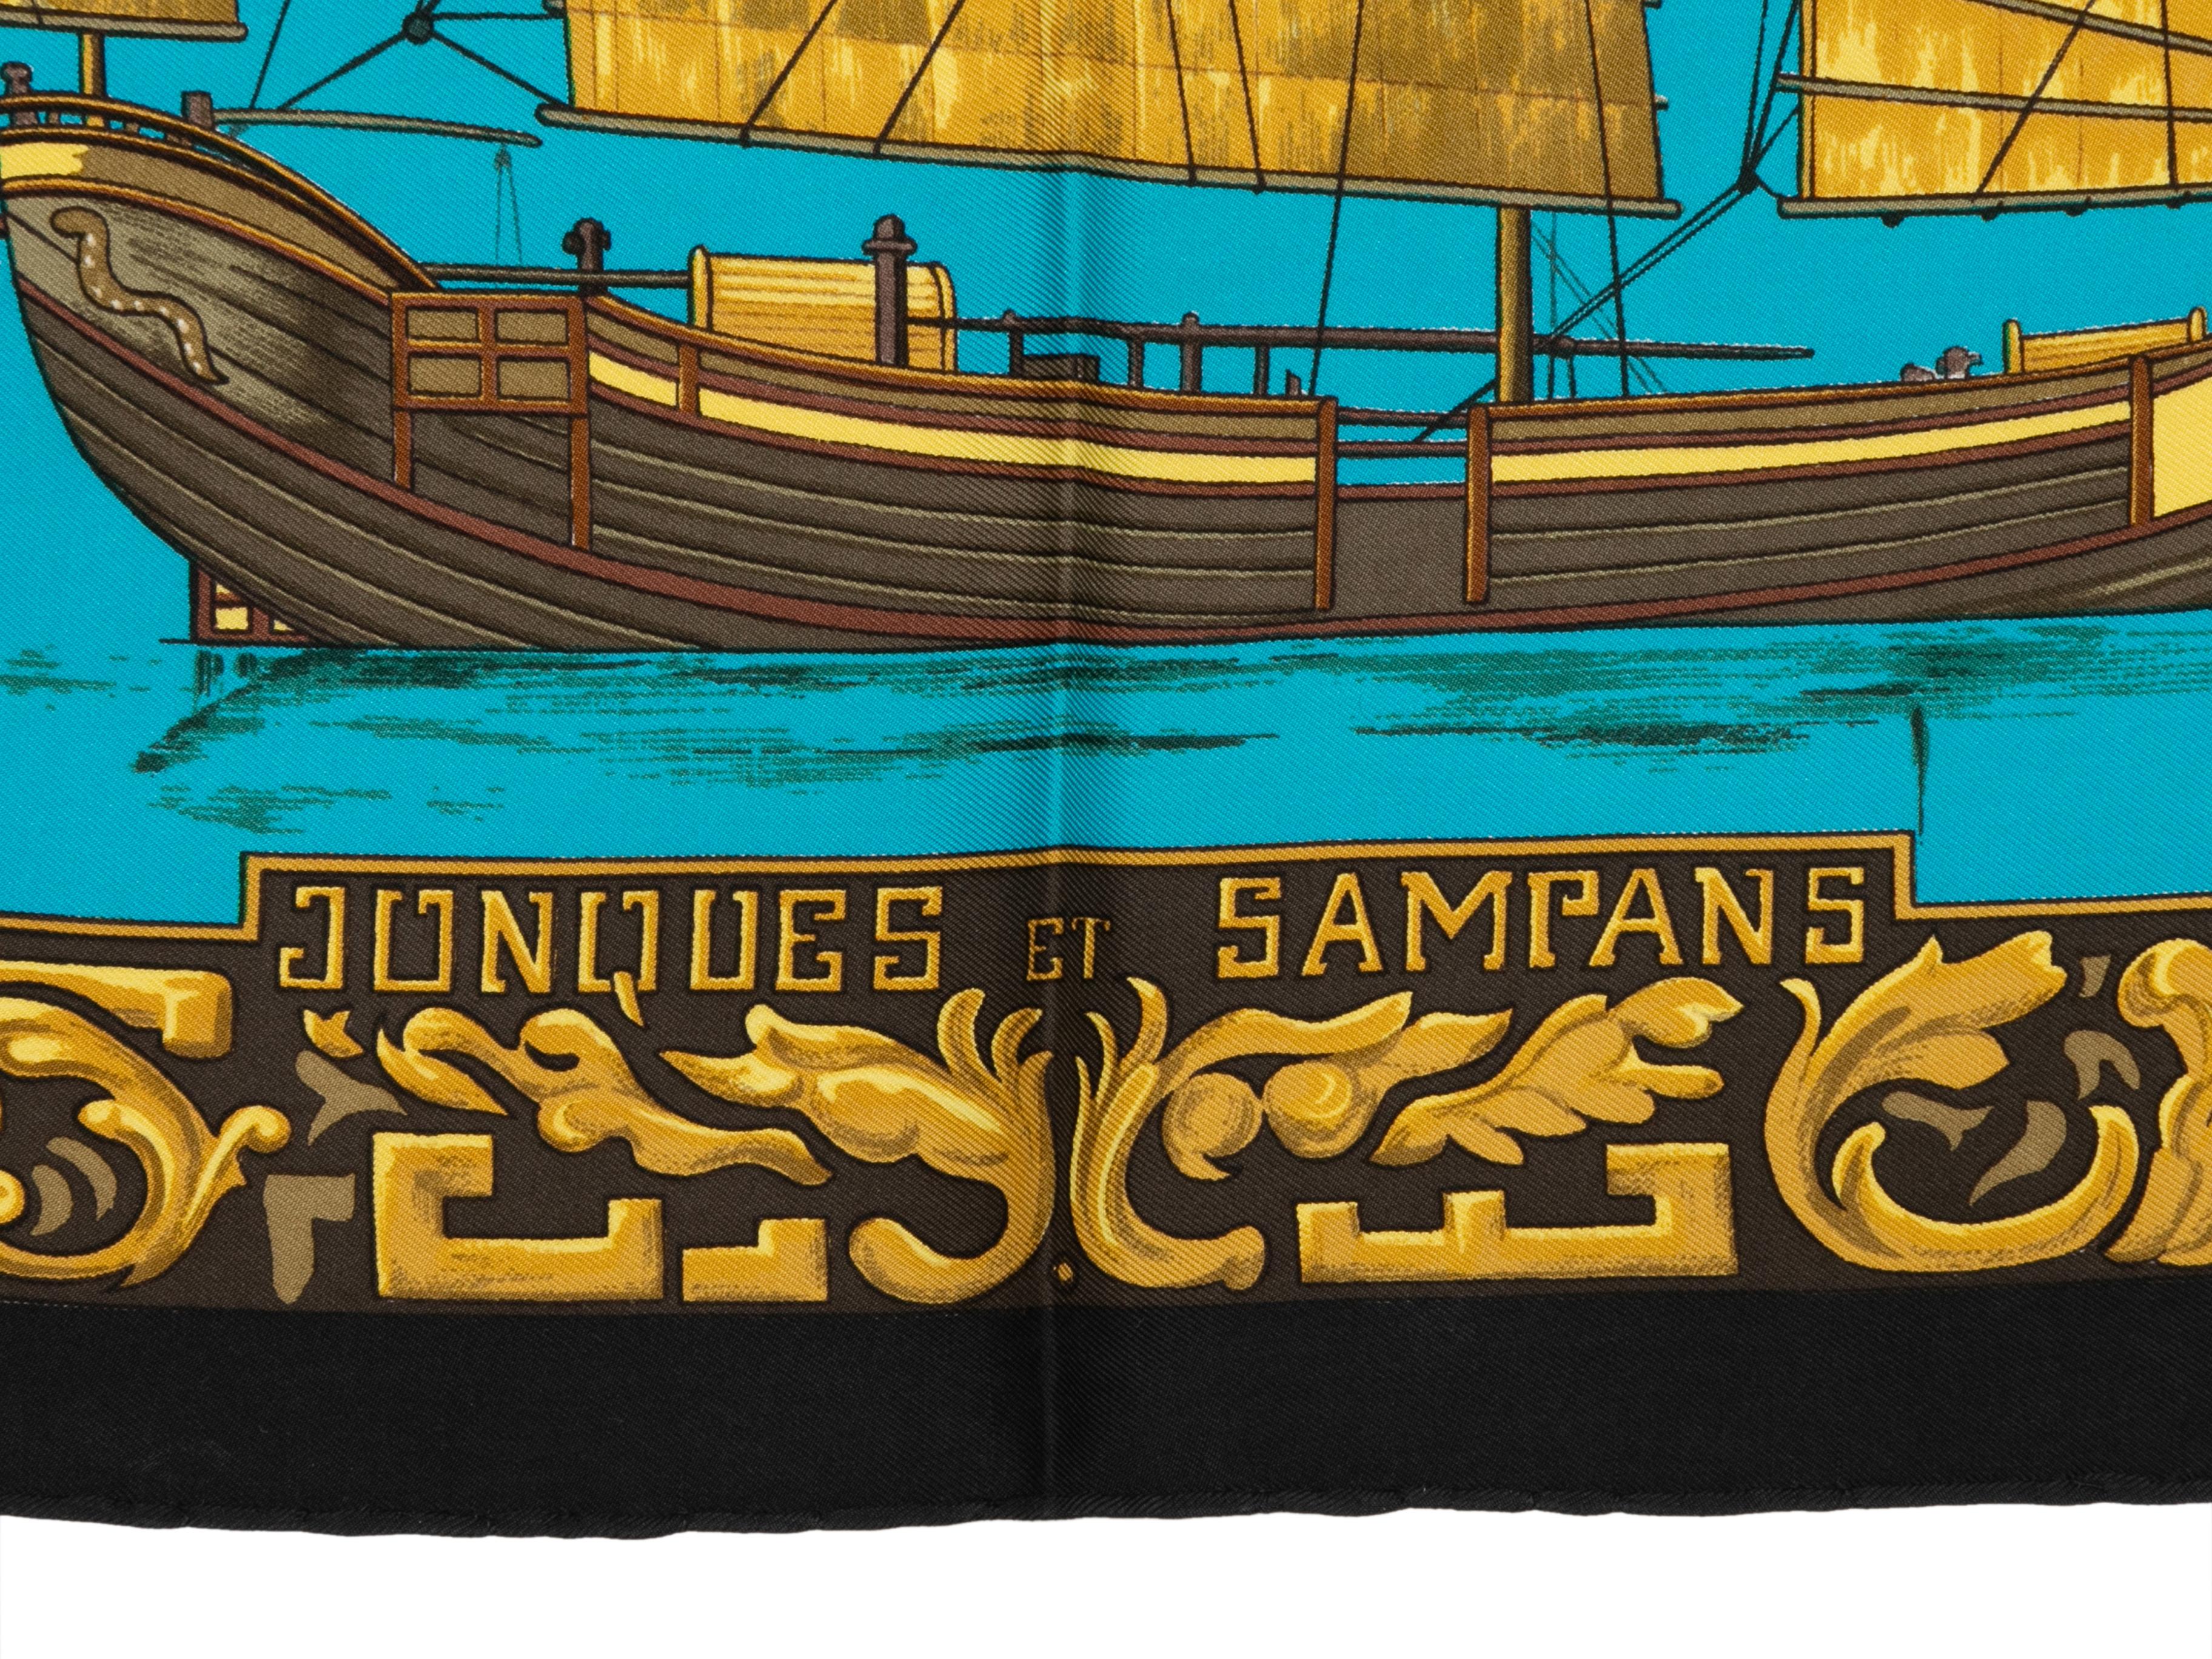 Teal & Gold Hermes Jonques et Sampans Motif Printed Silk Scarf In Good Condition For Sale In New York, NY